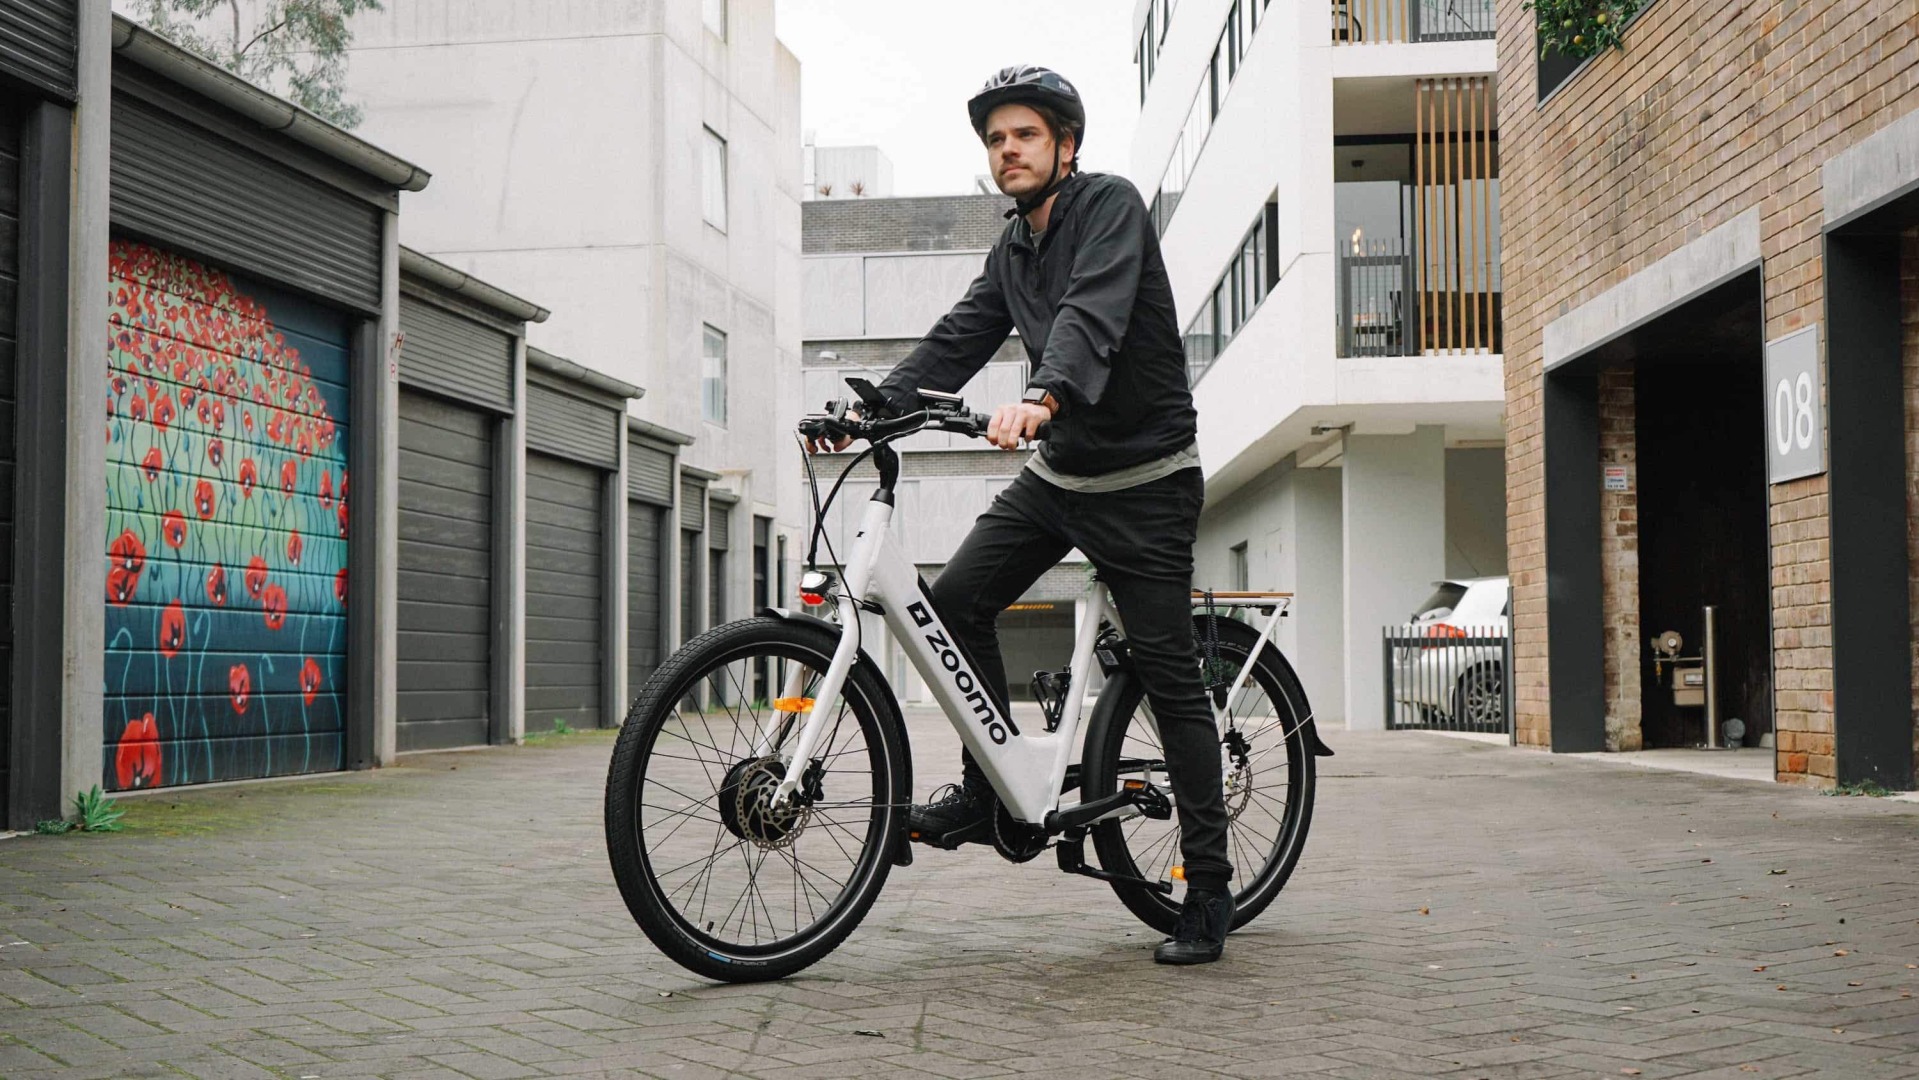 The Main Reasons Why People Choose To Buy An E-Bike